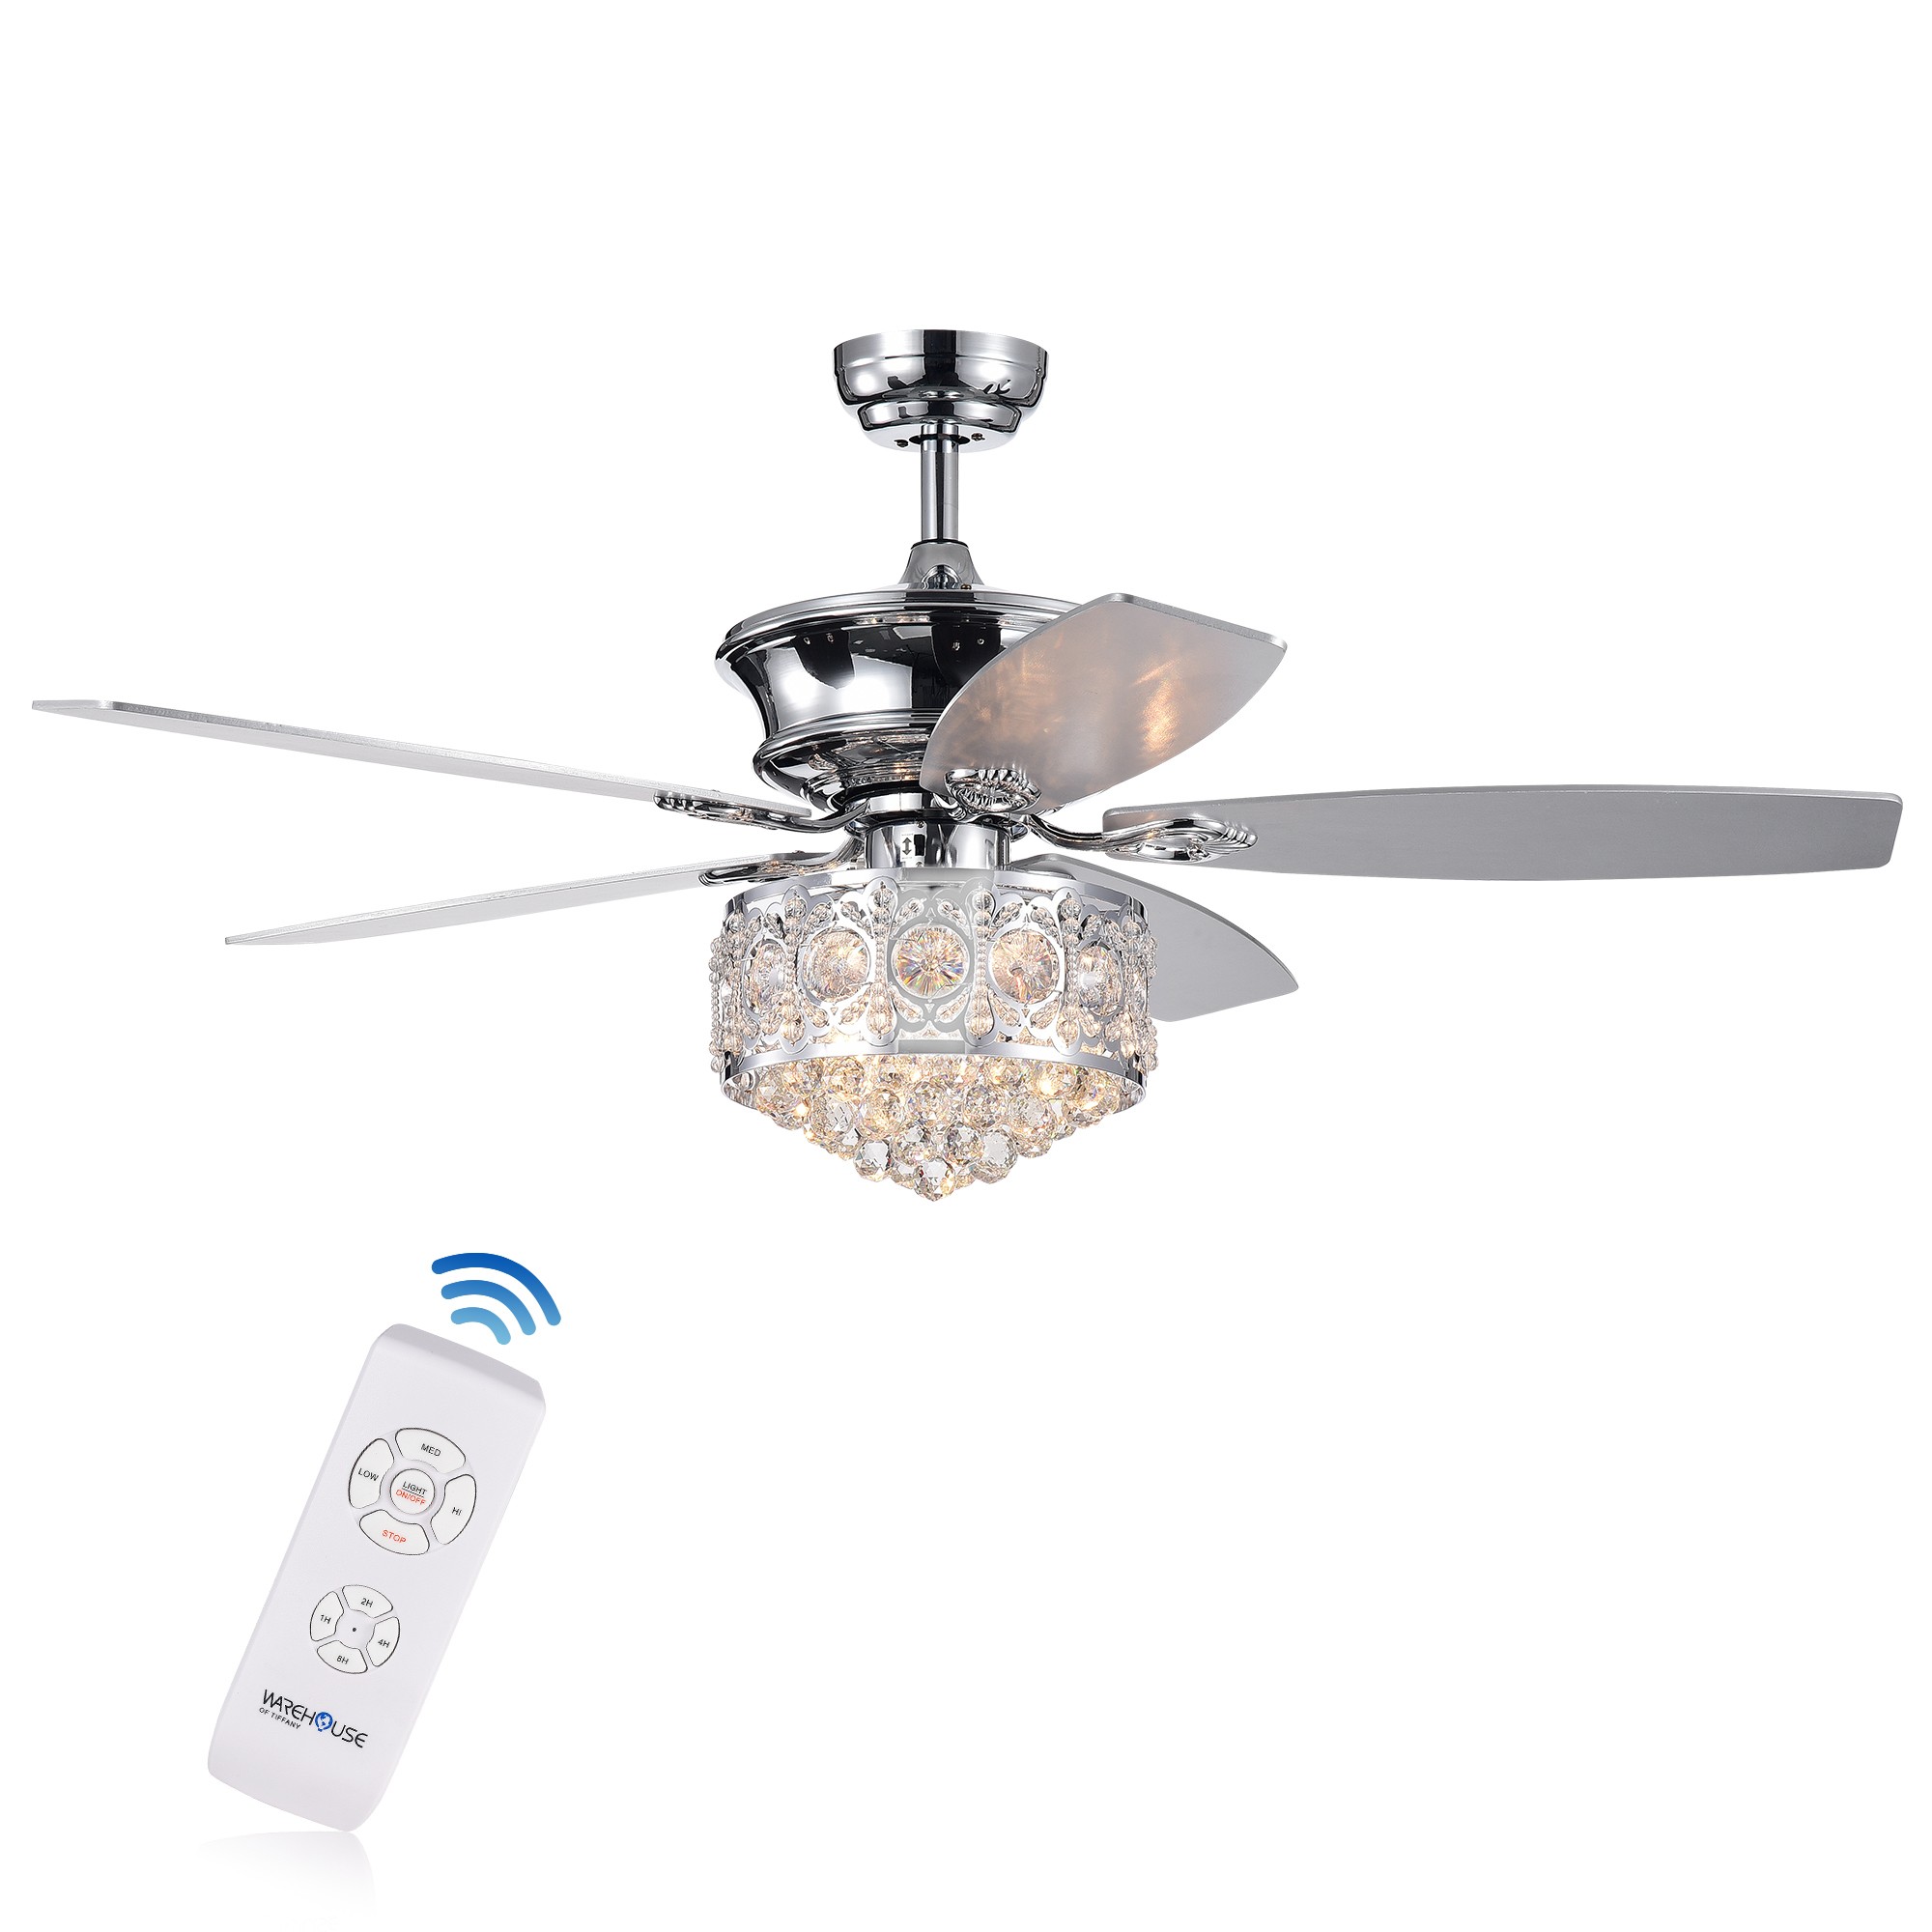 Hasna 52-inch Chrome & Crystal Lighted Ceiling Fan Optional Remote Control (Incl 2 Color Option Blades)